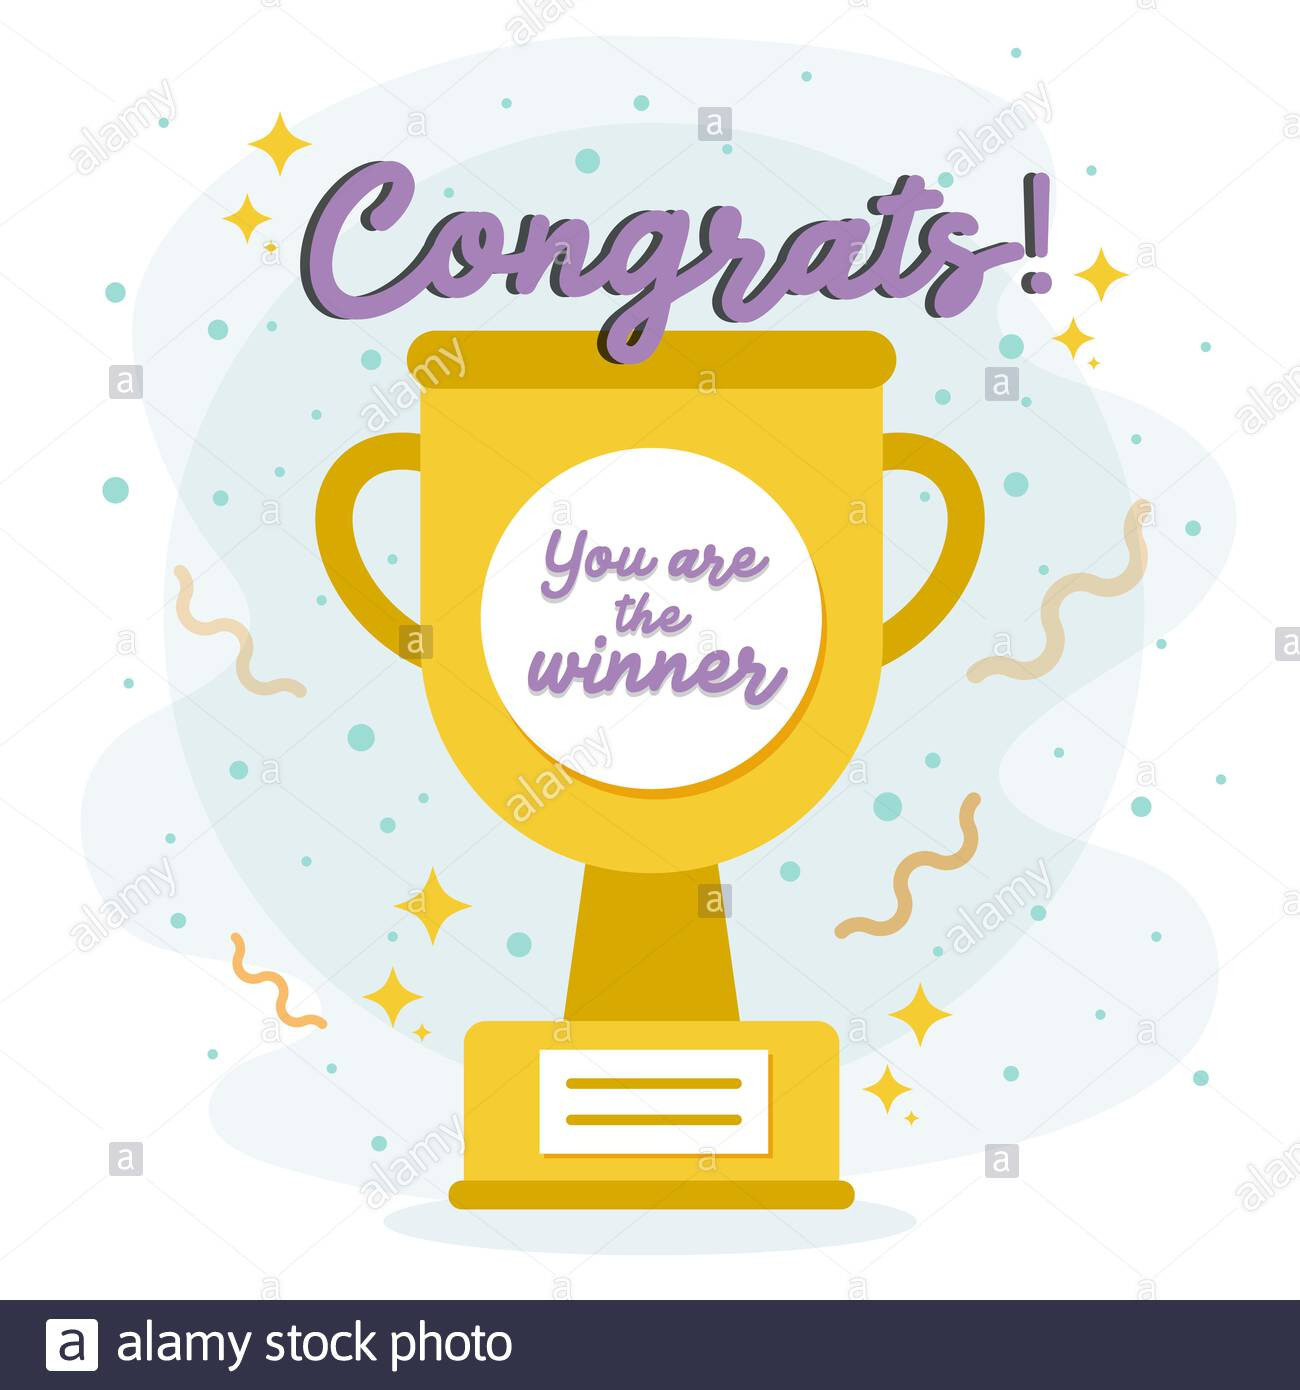 golden-trophy-cup-text-congrats!-you-are-the-winner-concept-of-winner-victory-success-leadersh...jpg